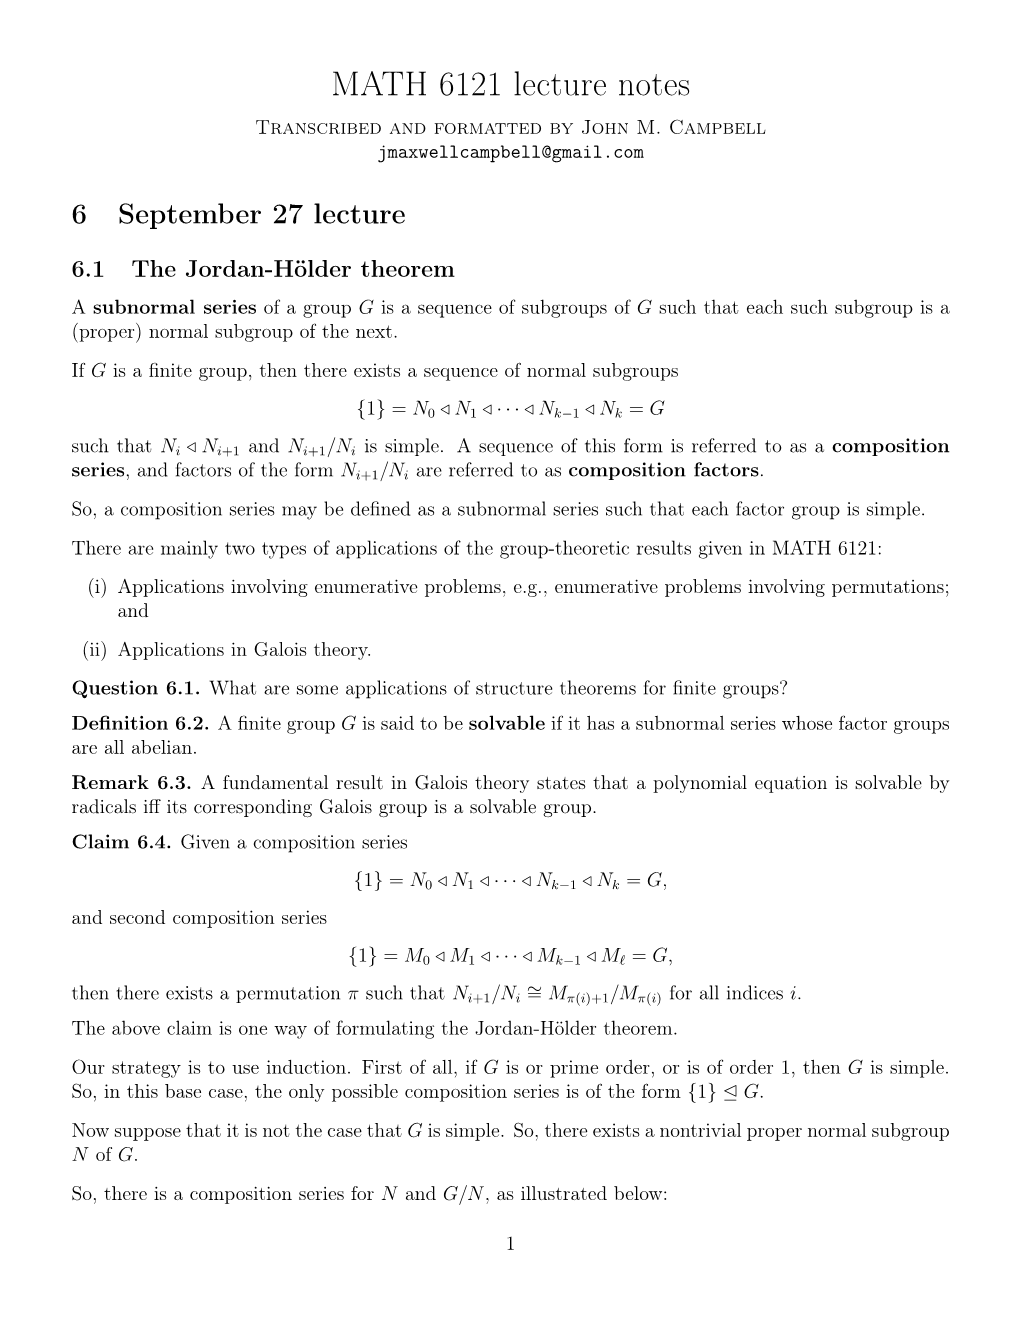 MATH 6121 Lecture Notes Transcribed and Formatted by John M